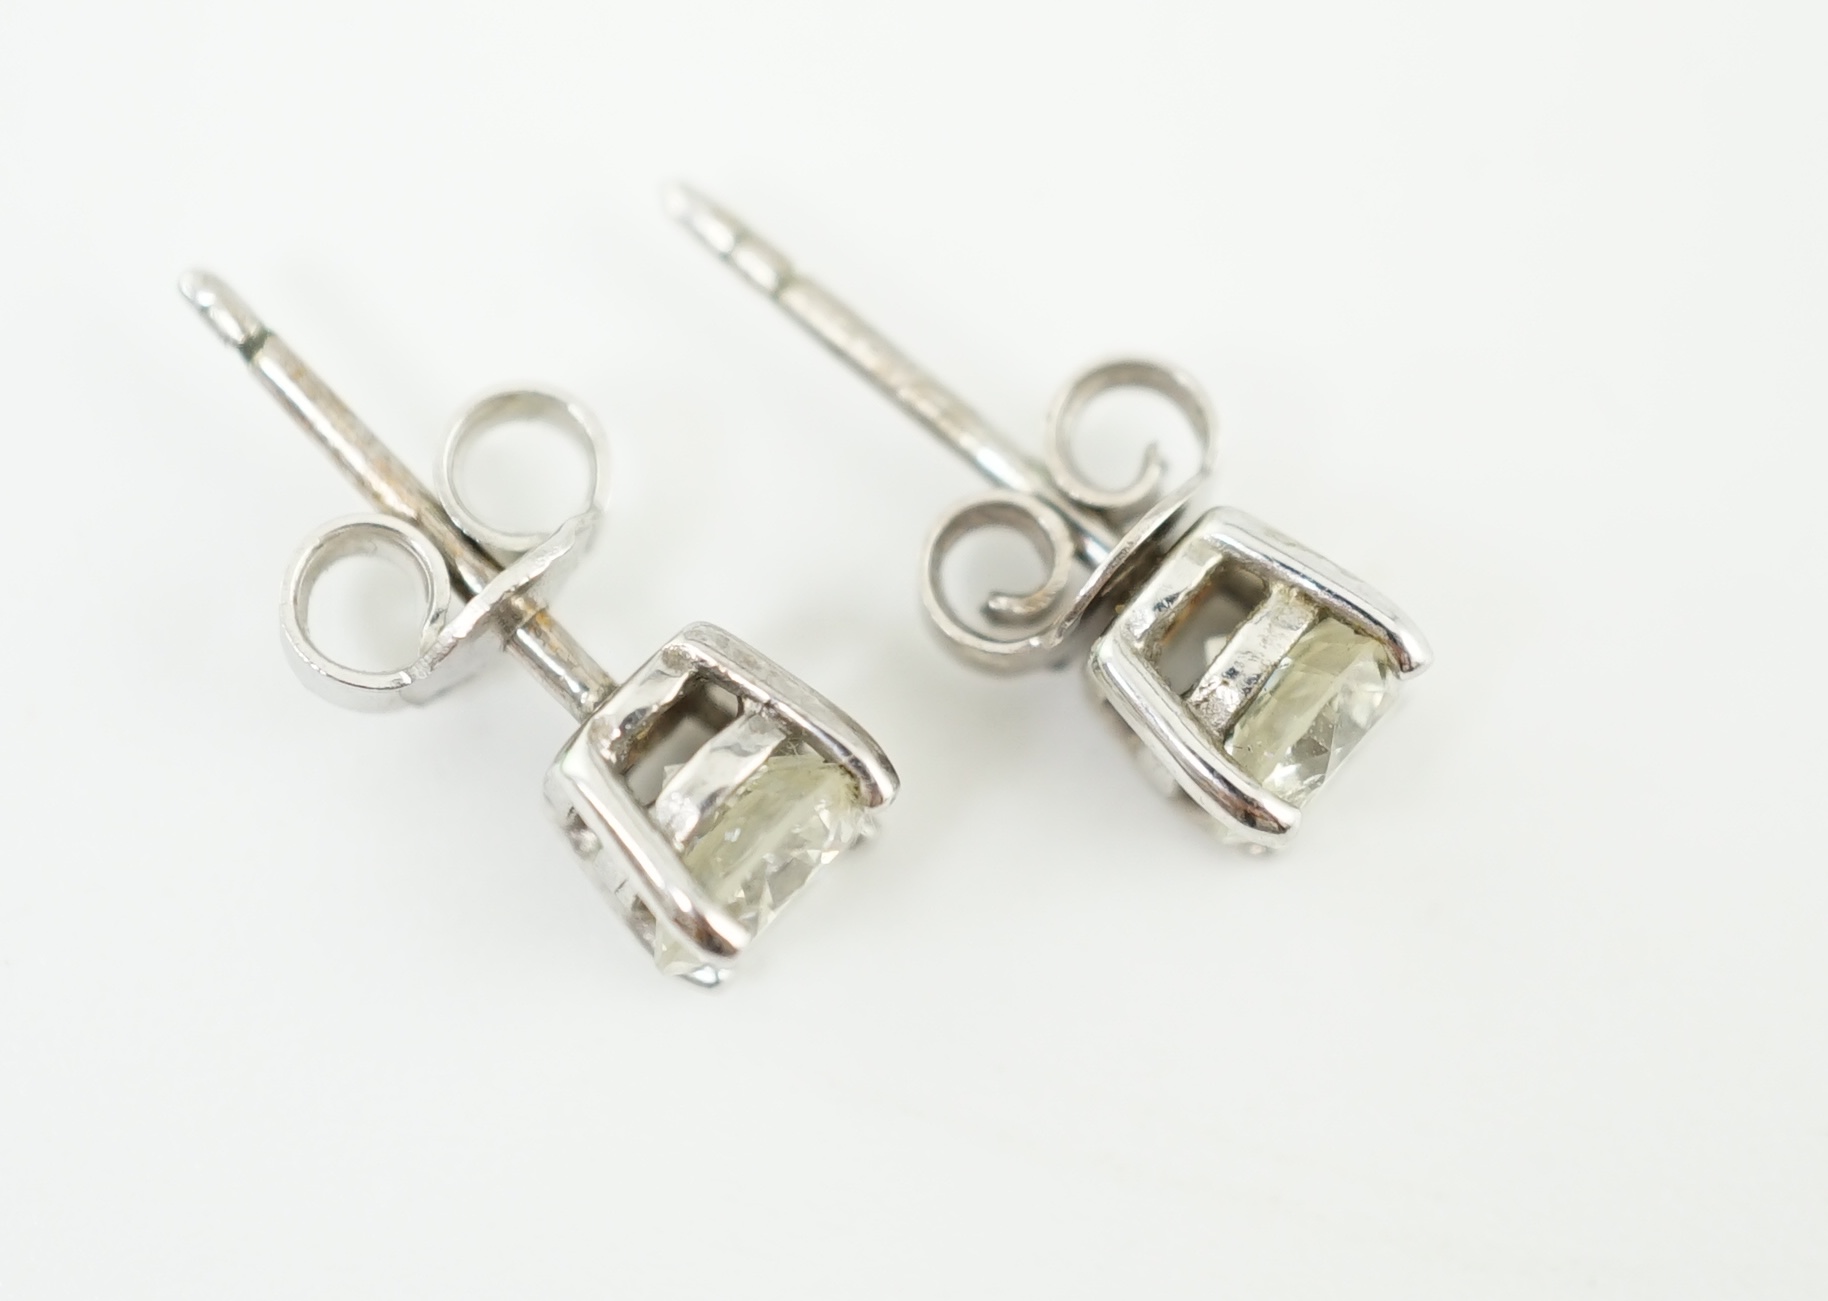 A pair of 18k white gold and solitaire diamond set ear studs